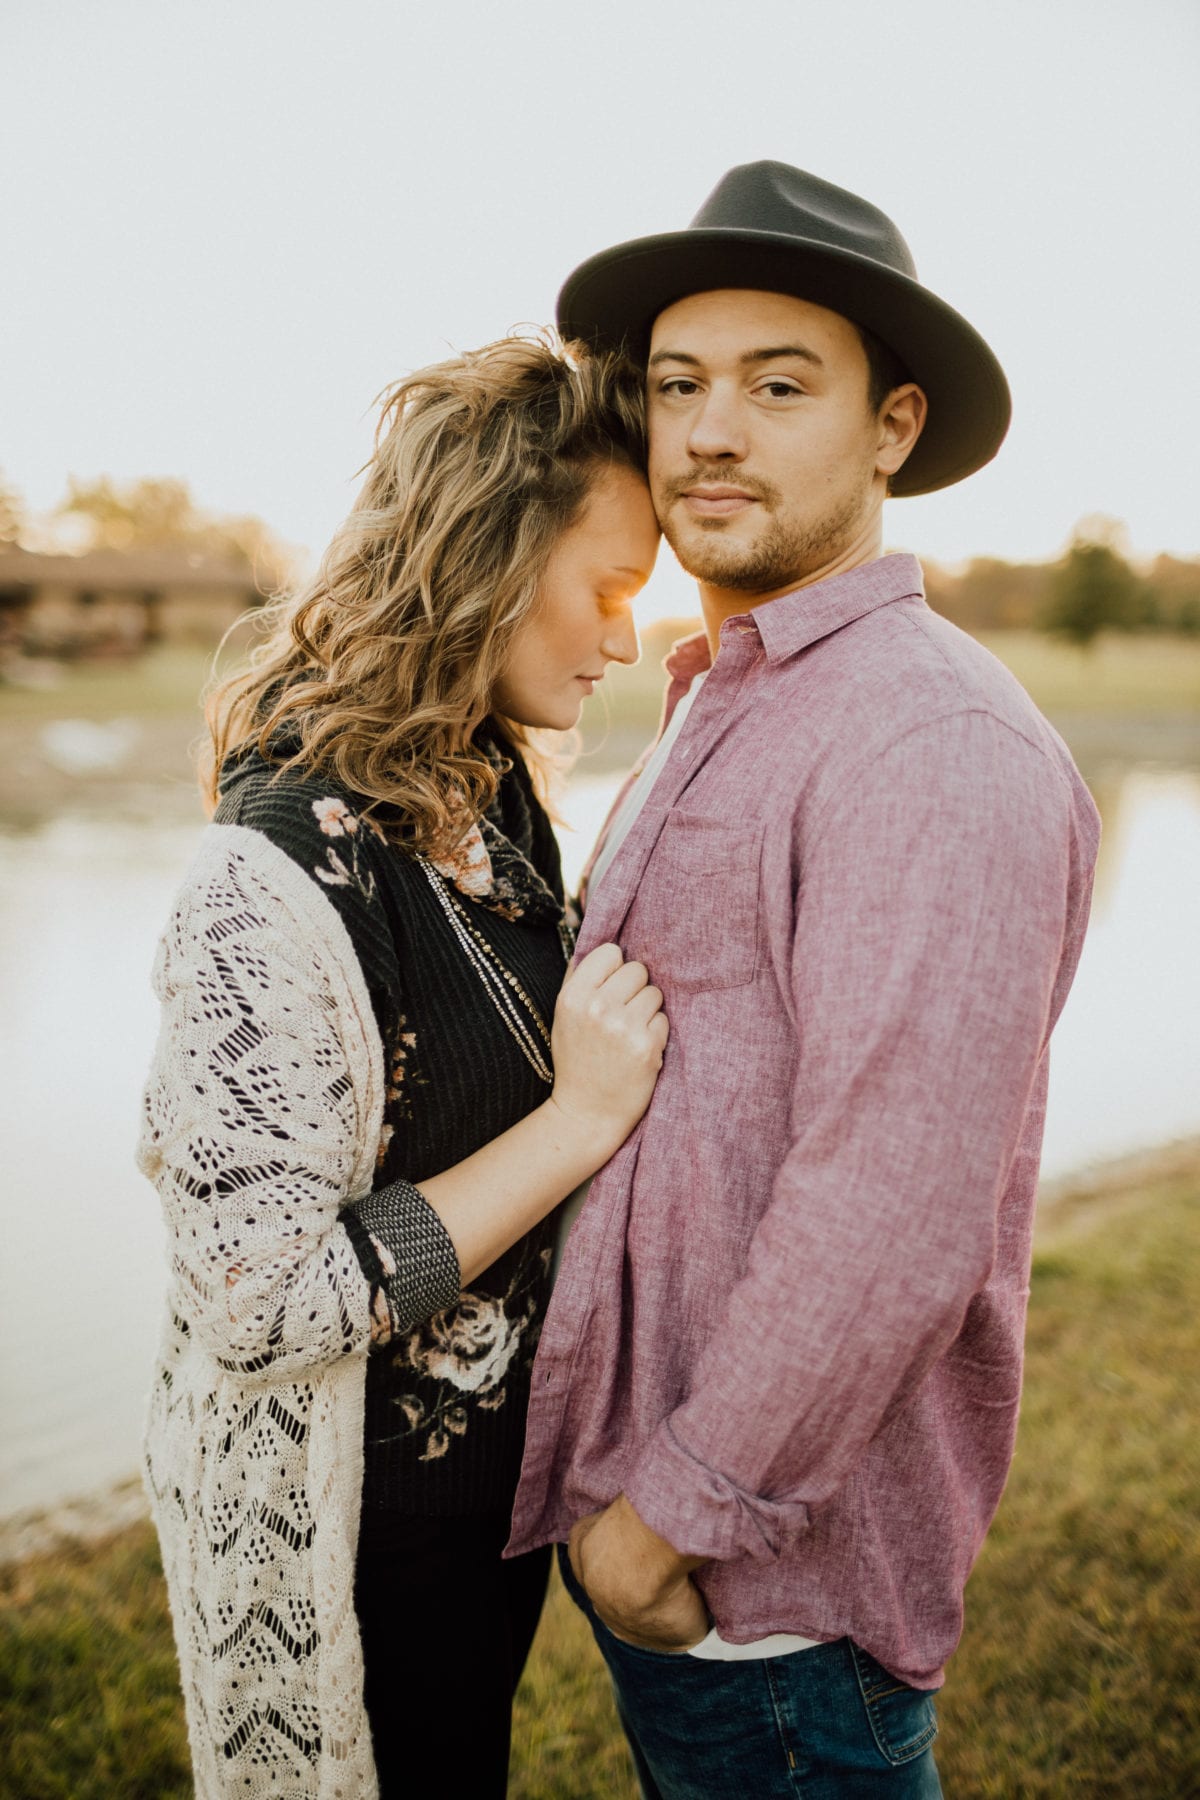 6 tips for an amazing engagement session - Dayton and Cincinnati Engagement Photographer